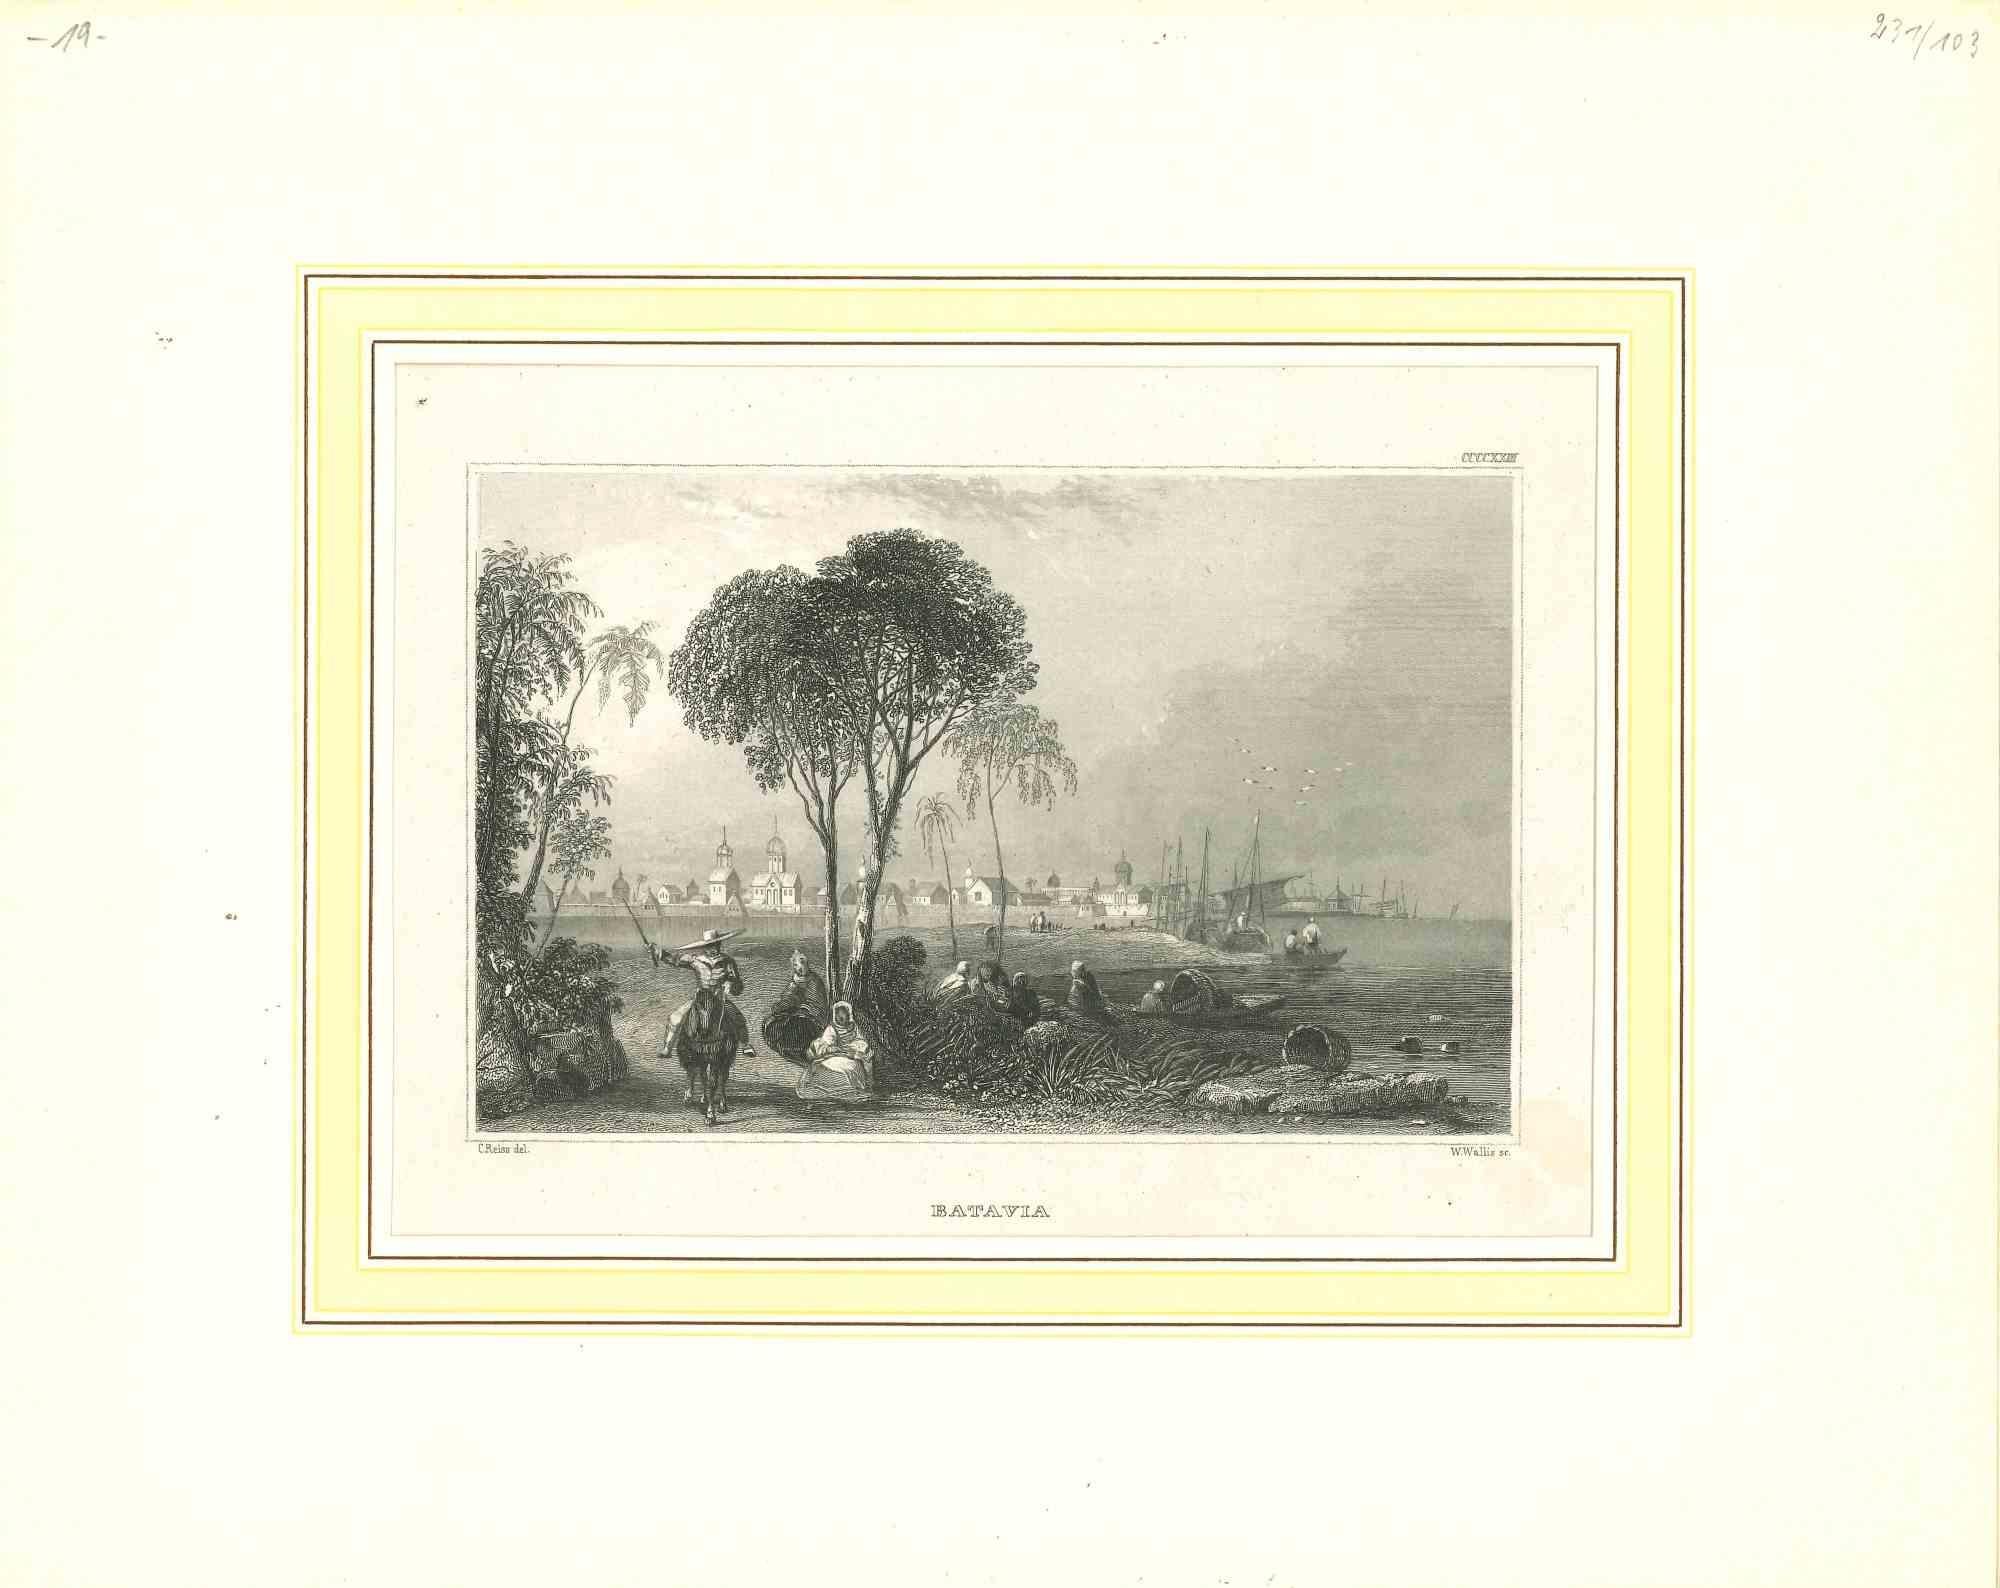 Unknown Figurative Print - Ancient View of Bombay - Original Lithograph - Half of the 19th Century